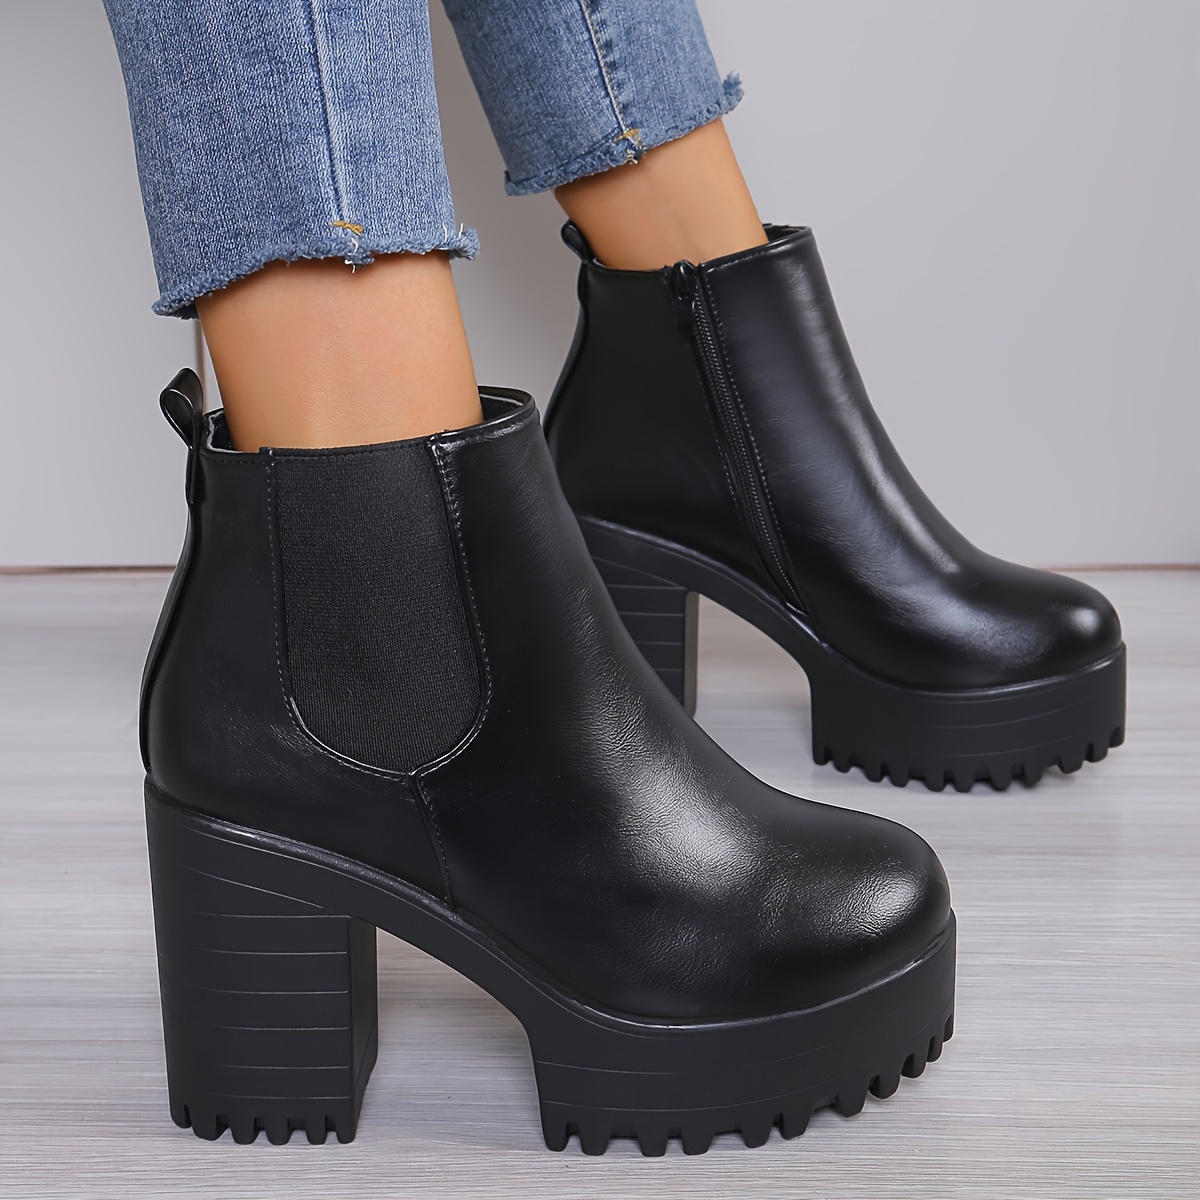 

Women's Chunky Heeled Chelsea Boots, Fashion Black Platform Side Zipper Ankle Boots, Classic Design Short Boots